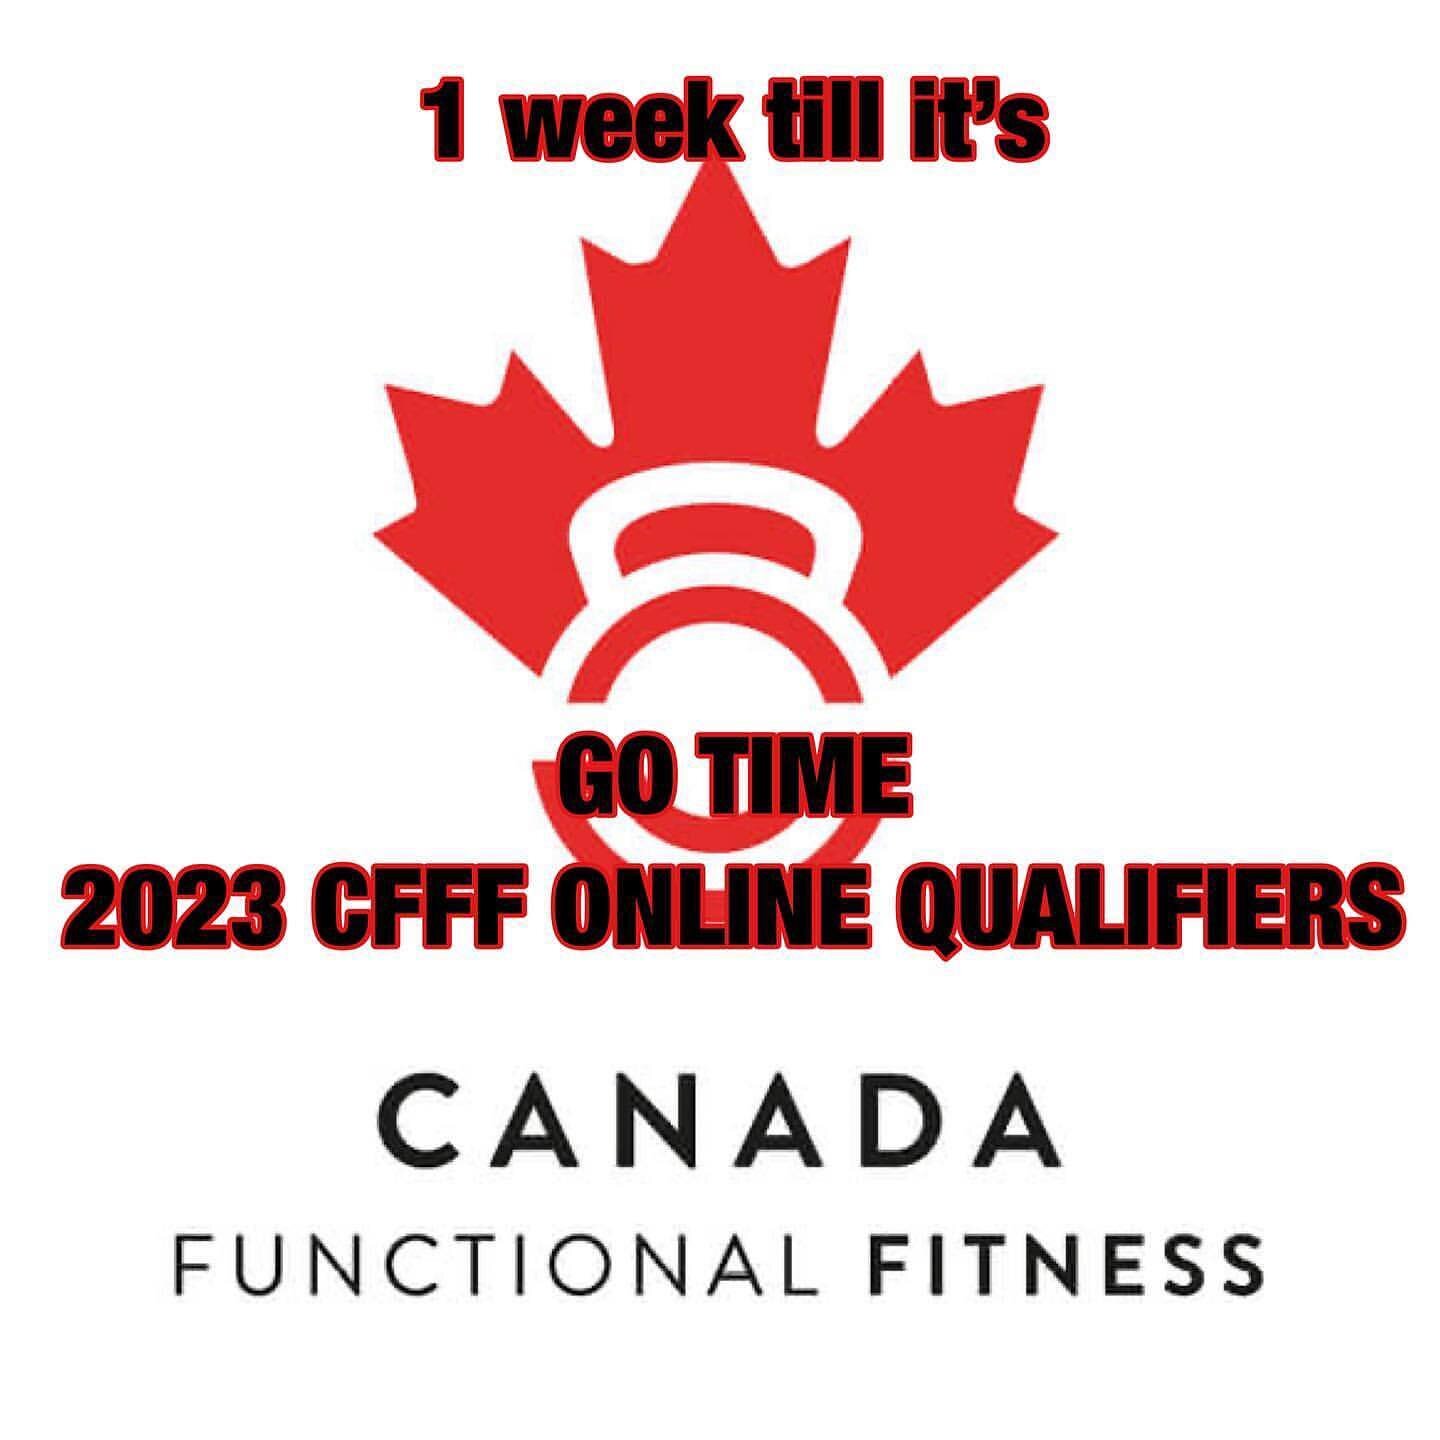 Online qualifier 2023 starts this week!!

Register via @canadian_functional_fitness 

Link in bio. 

Posted @withregram &bull; @canadian_functional_fitness 🚨 CFFF ONLINE QUALIFIERS 🚨 
Don&rsquo;t forget to sign up for the @canadian_functional_fitne